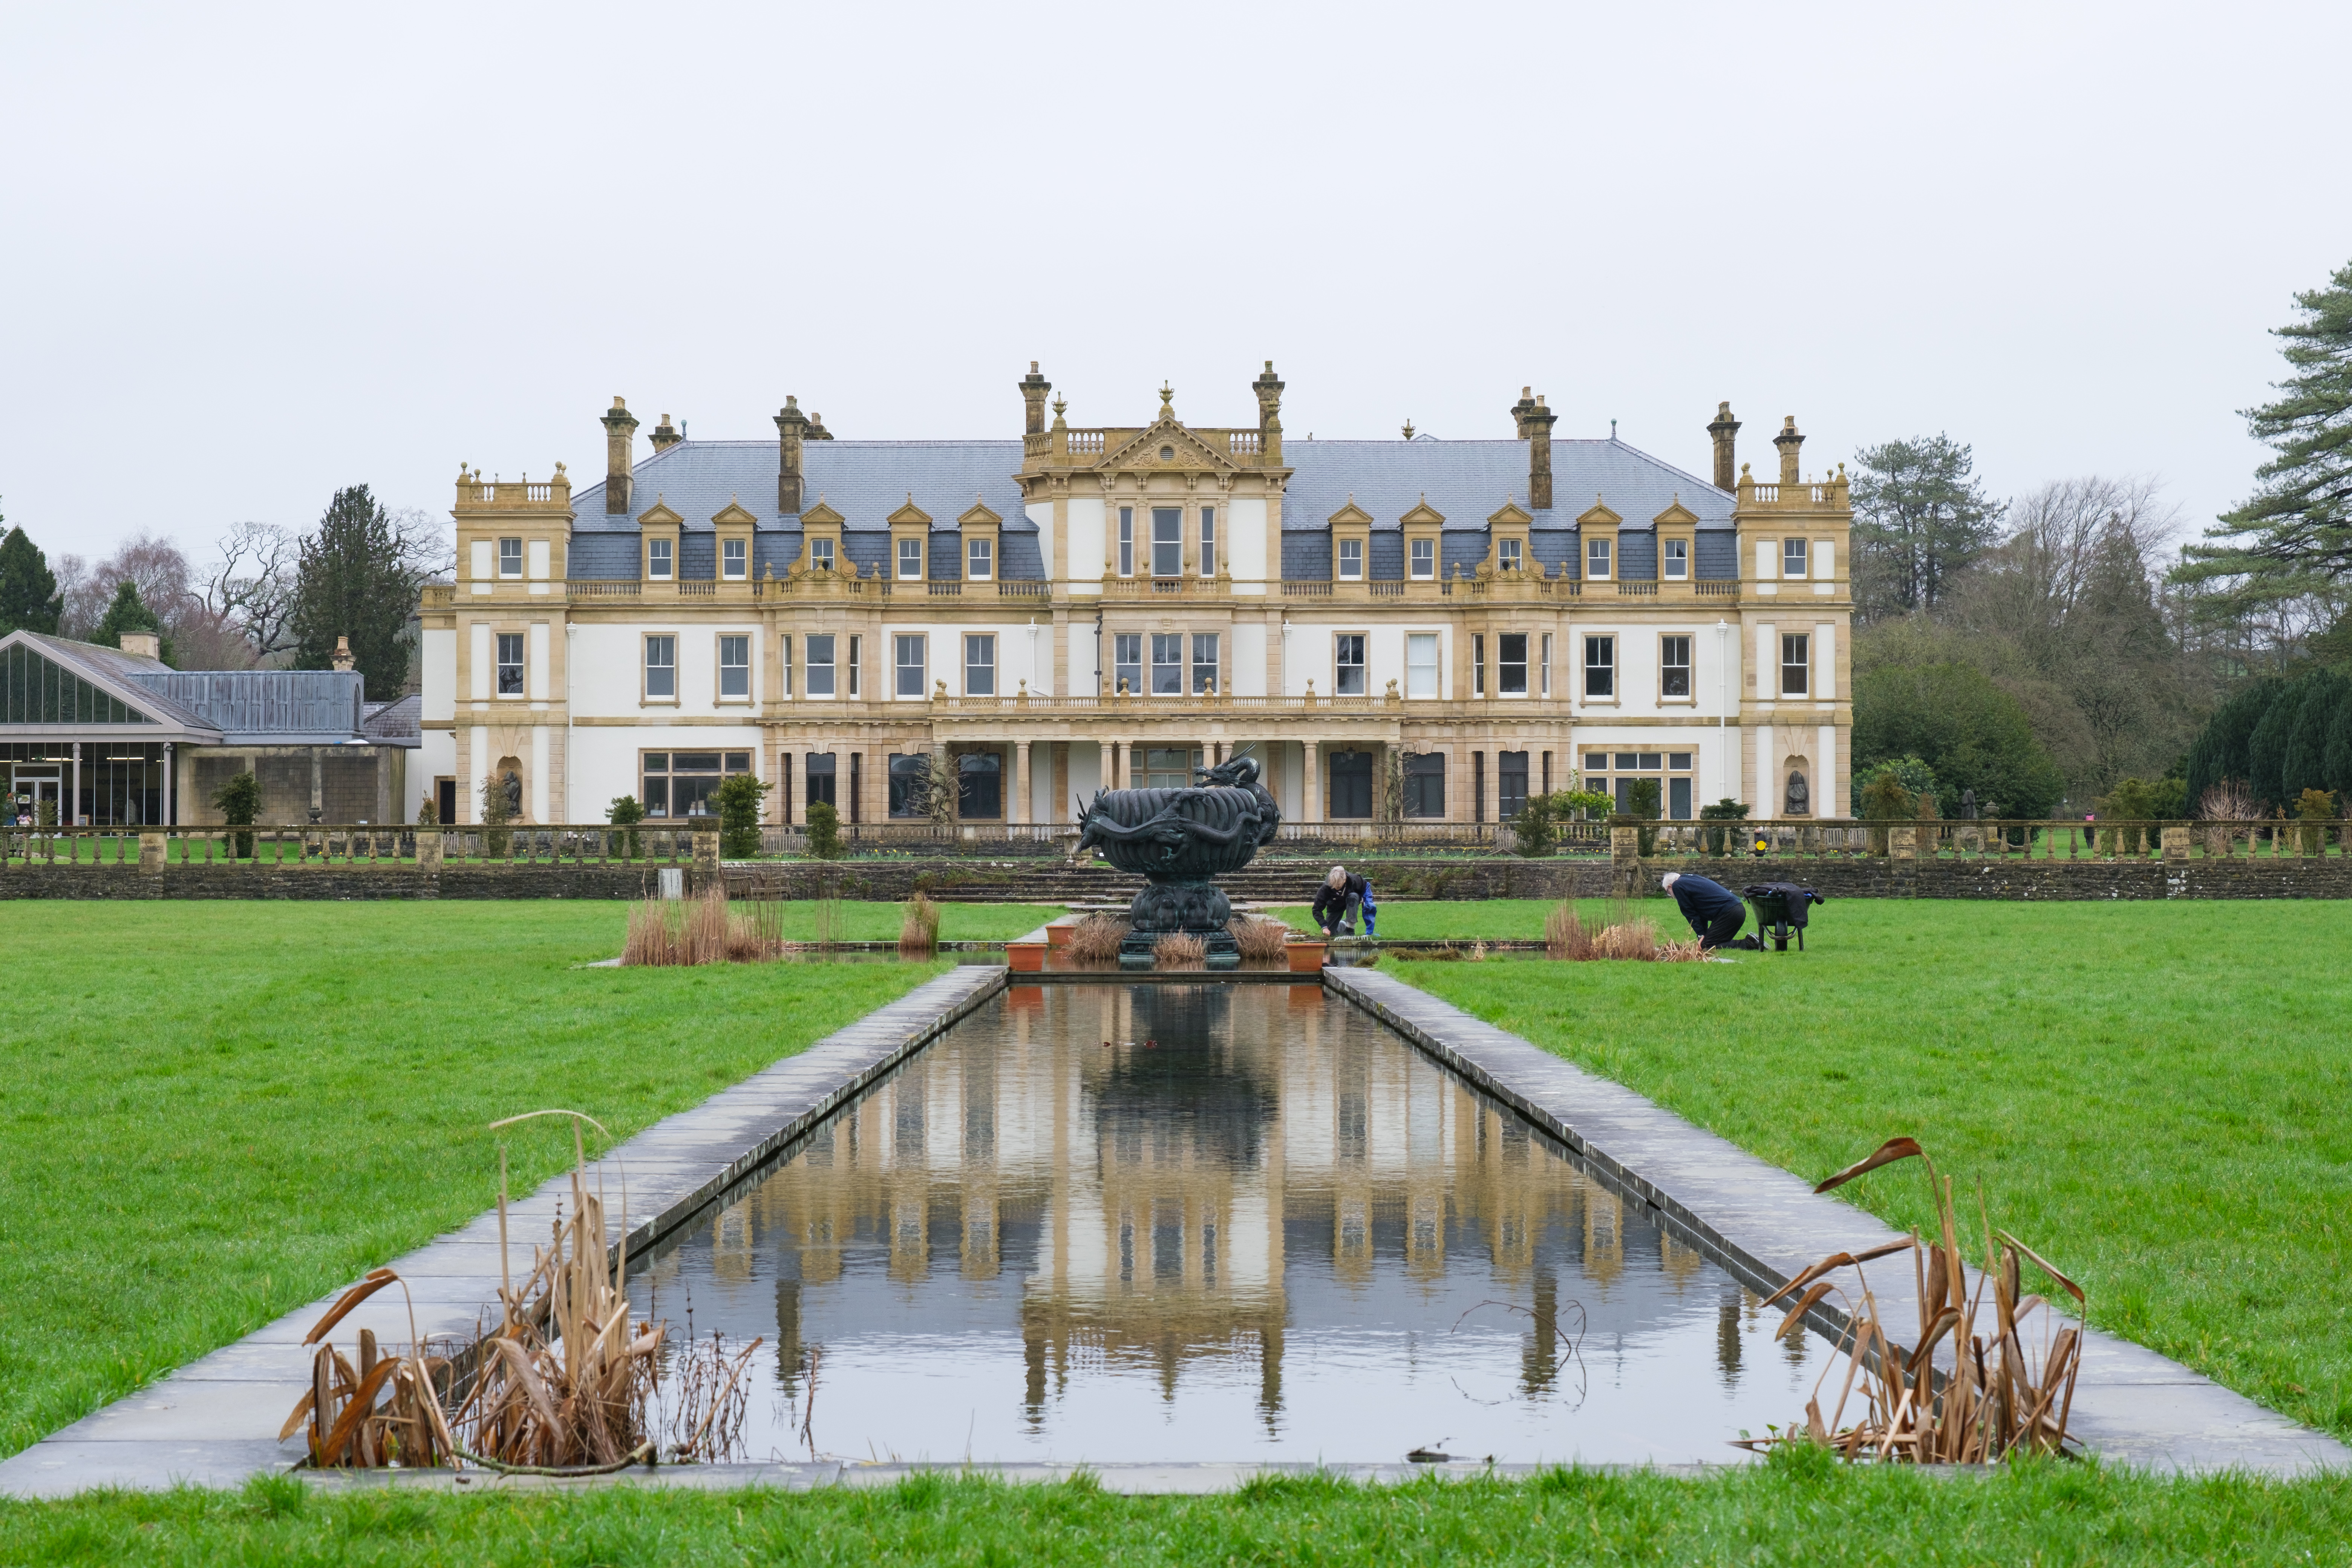 A photo of a British stately home on an overcast day, reflected in a water feature with a large sculpture in the mid-ground.